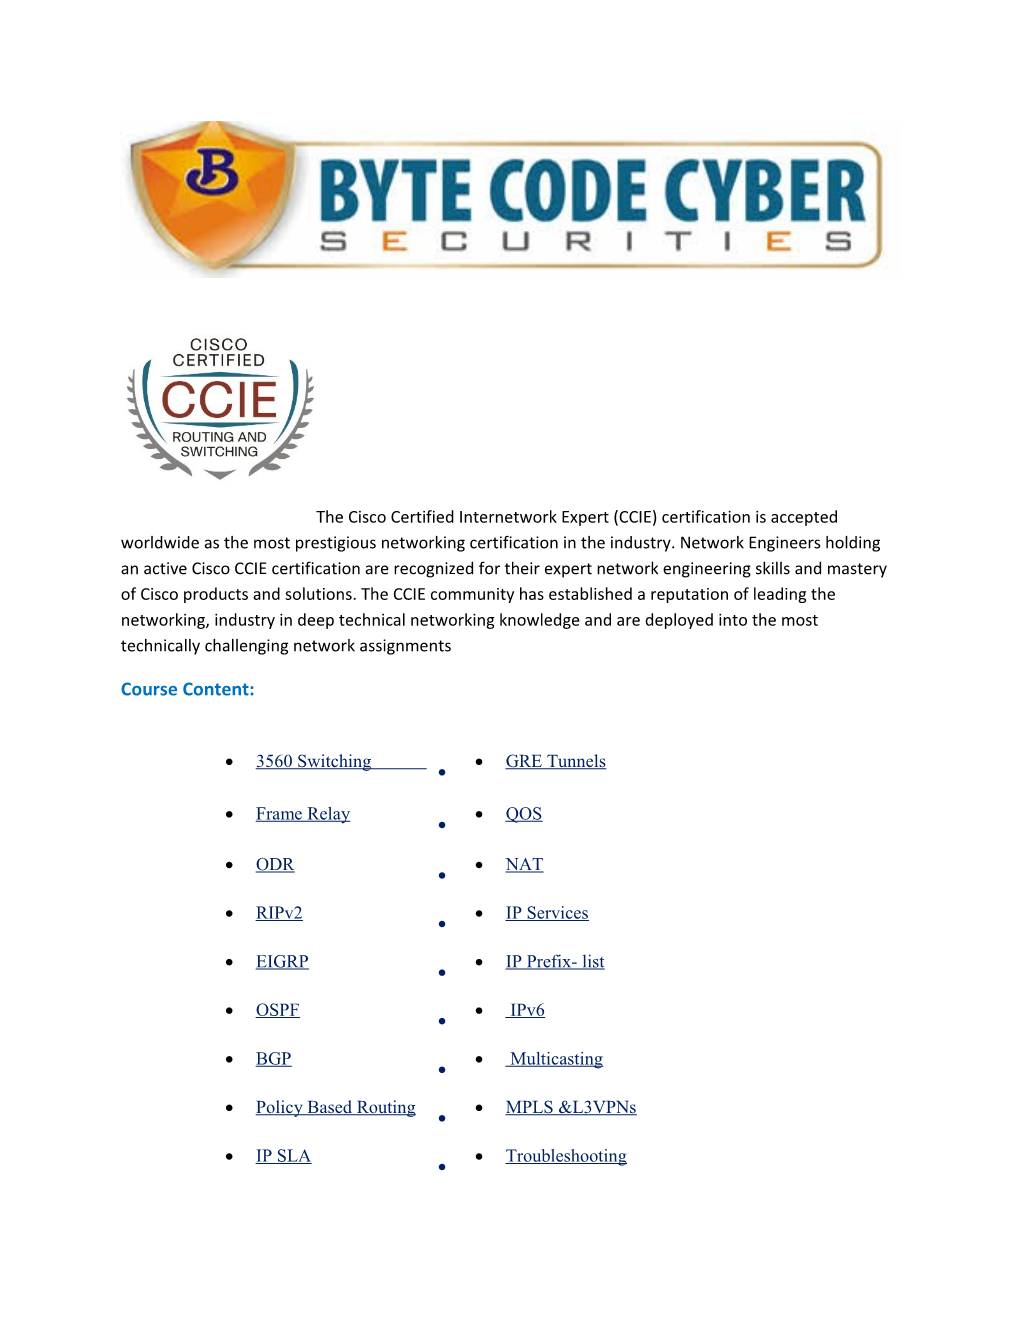 The Cisco Certified Internetwork Expert (CCIE) Certification Is Accepted Worldwide As